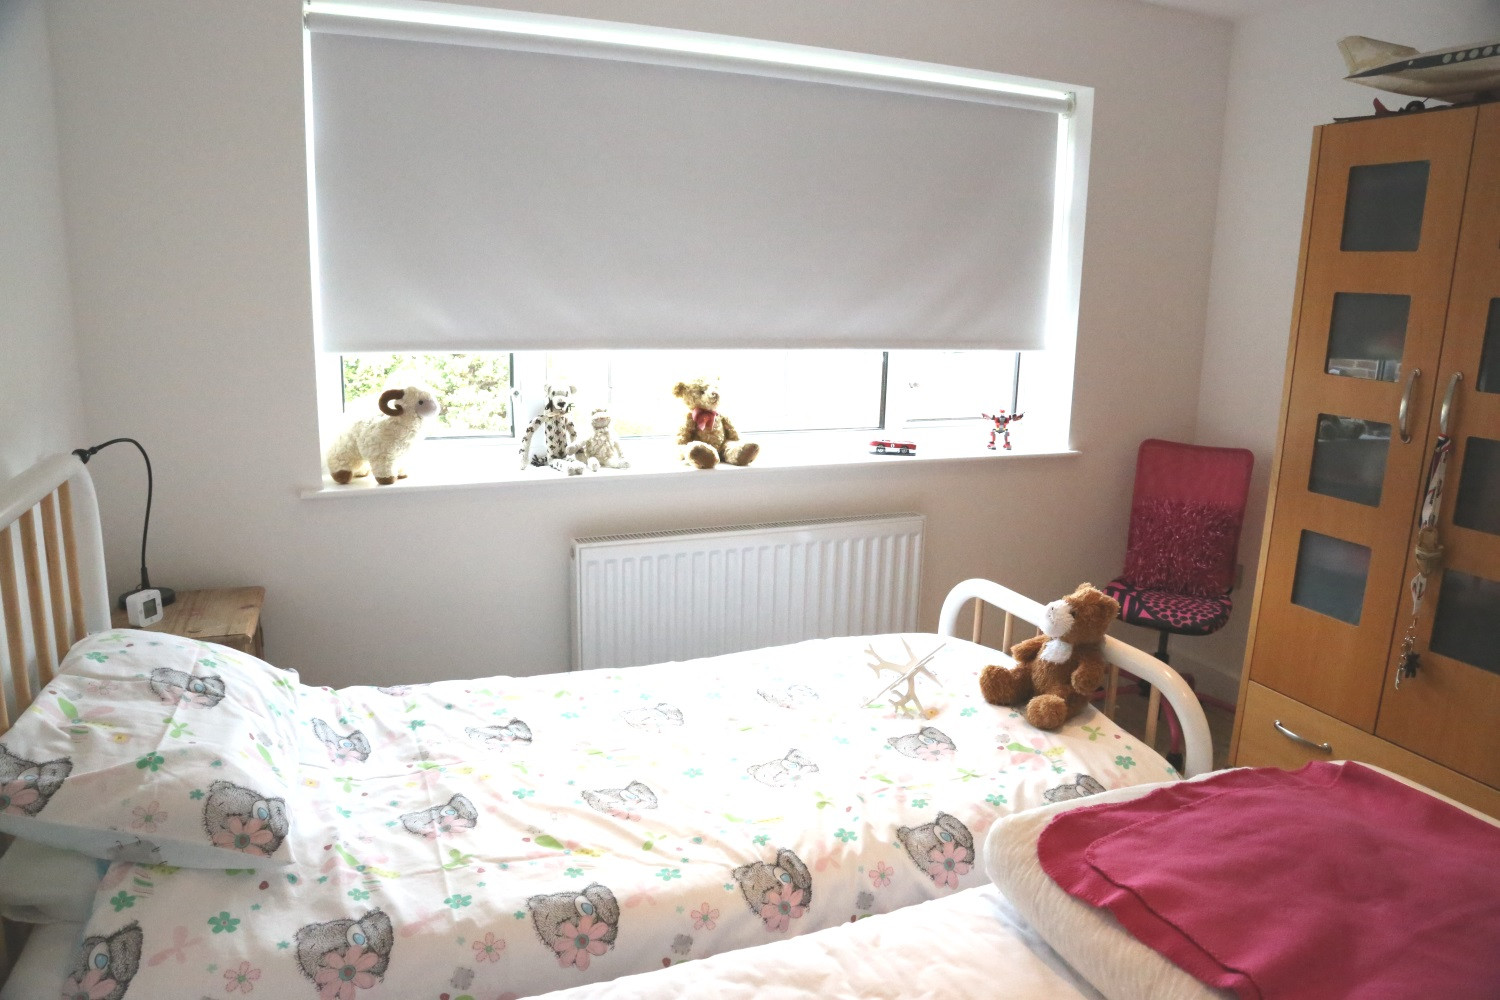 Kids Room Shades
 What are the best blinds to keep light out